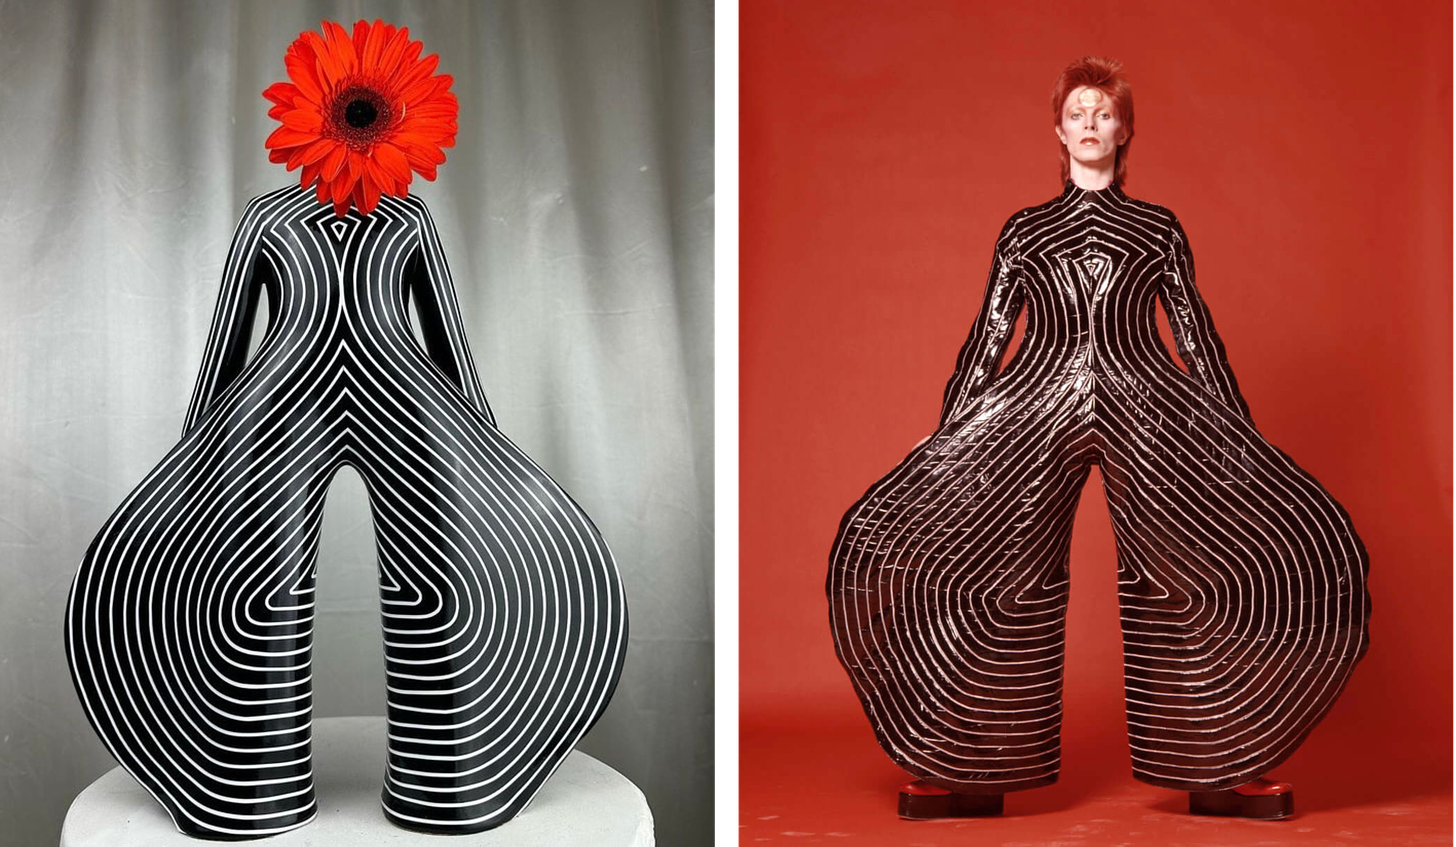 Left, the Starry Icon vase by Michelle Sieg which is made to look like the iconic jumpsuit famously worn by David Bowie; Right, David Bowie wears the outfit that inspired the vase; a black vinyl jumpsuit with white stripes and pant legs that balloon out to the sides as if they were sculpted.